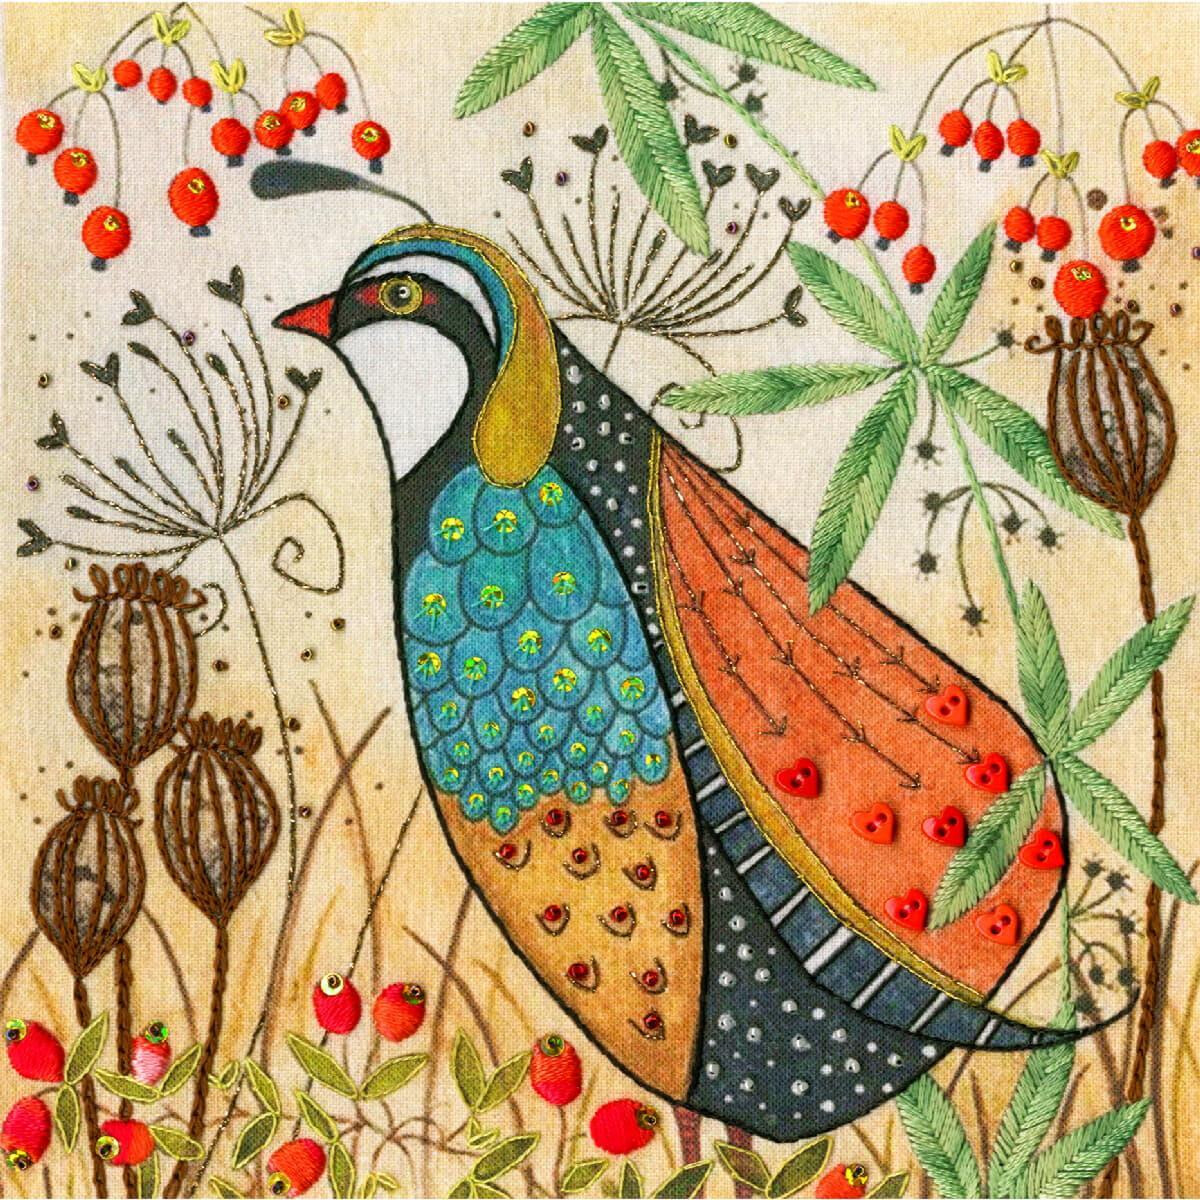 An illustrated bird with vibrant, patterned plumage...